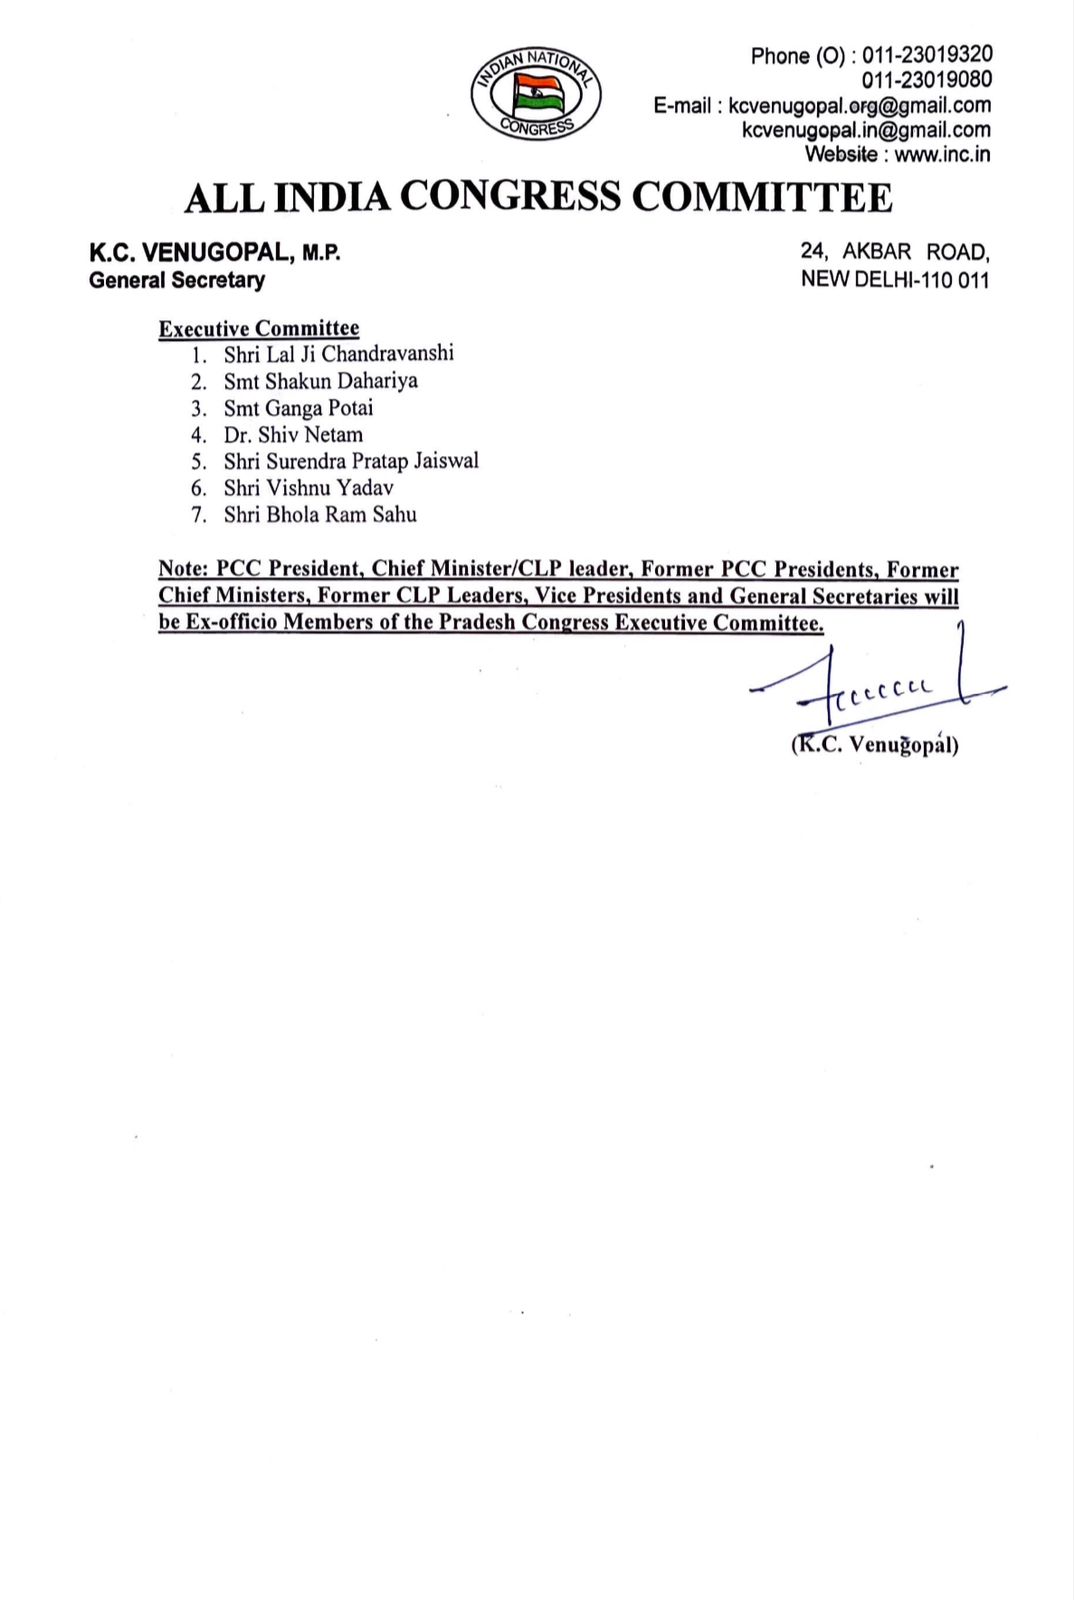 In view of the assembly elections, the formation of the executive committee with the appointment of general secretaries and secretaries in the Chhattisgarh Pradesh Congress Committee, see list,khabargali